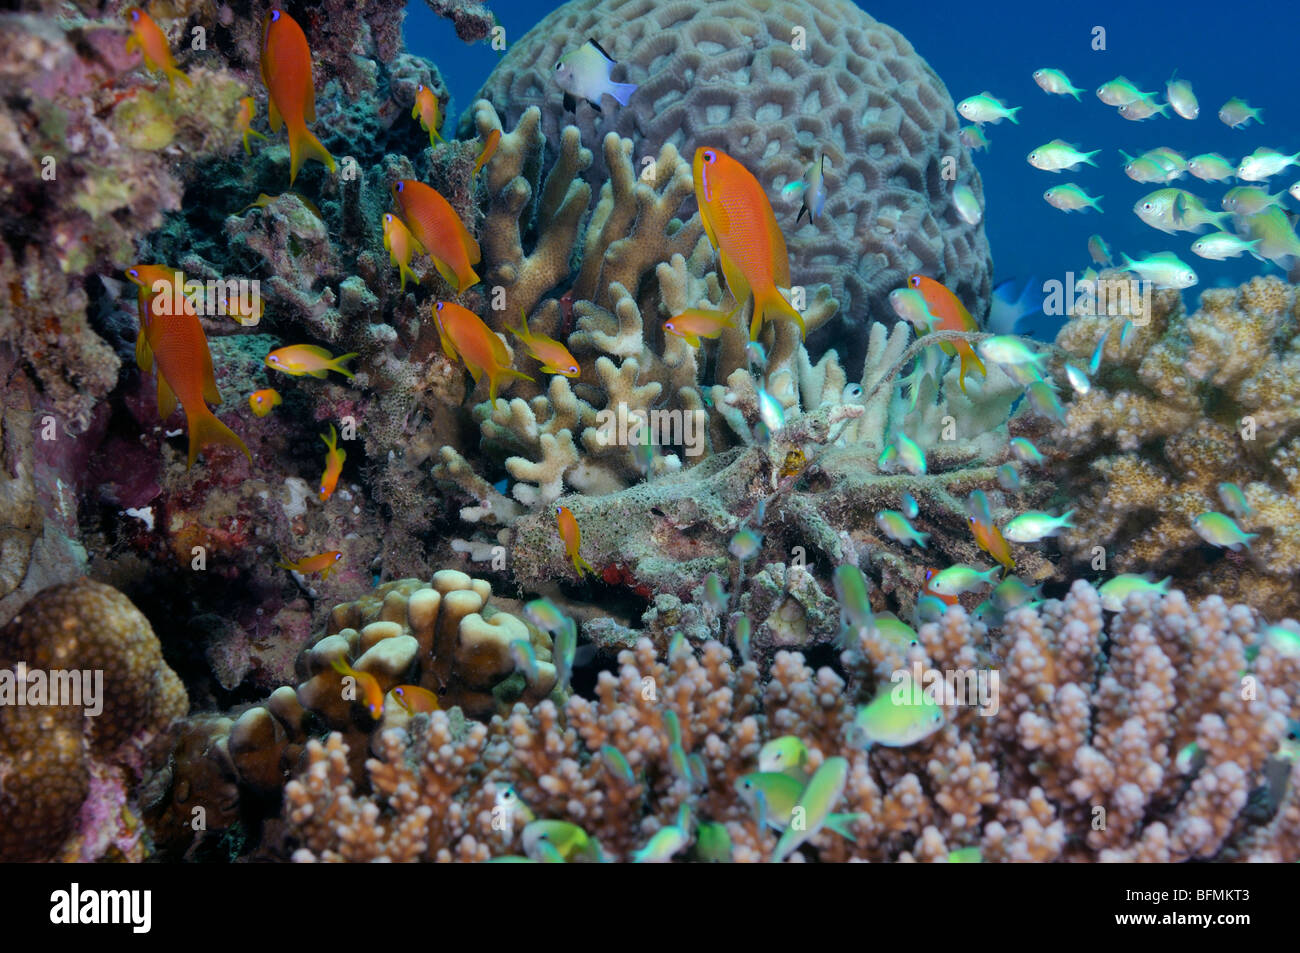 Coral reef with variety of hard corals and anthias fish, Red Sea Stock Photo